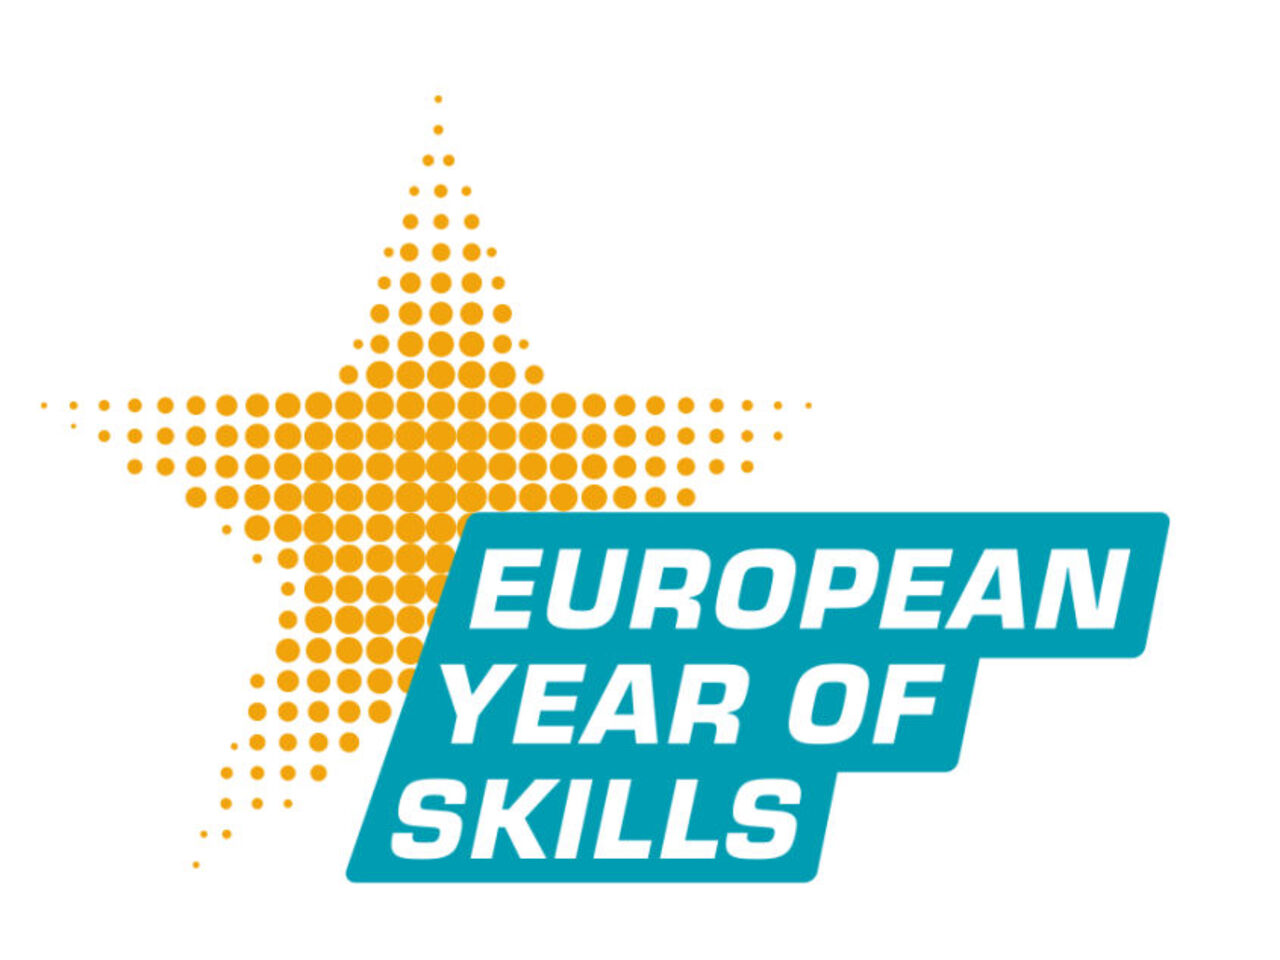 Join the European Union Year of Skills closing event